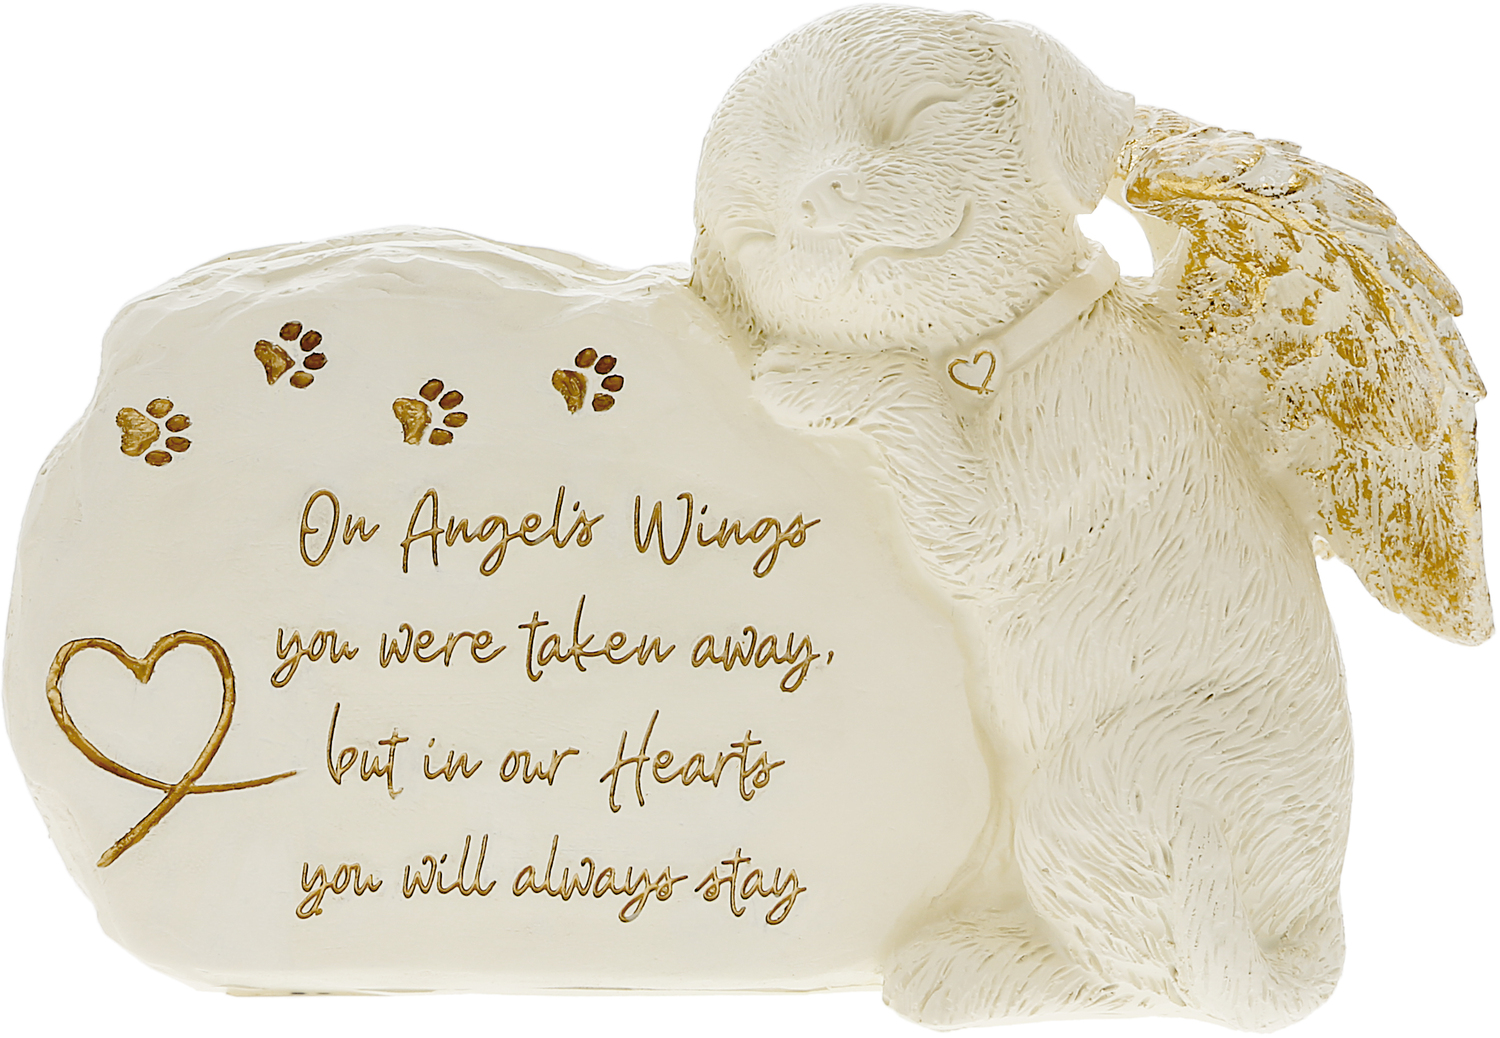 Dog Angel by Forever in our Hearts - Dog Angel - 7.5" x 5" Pet Memorial Stone